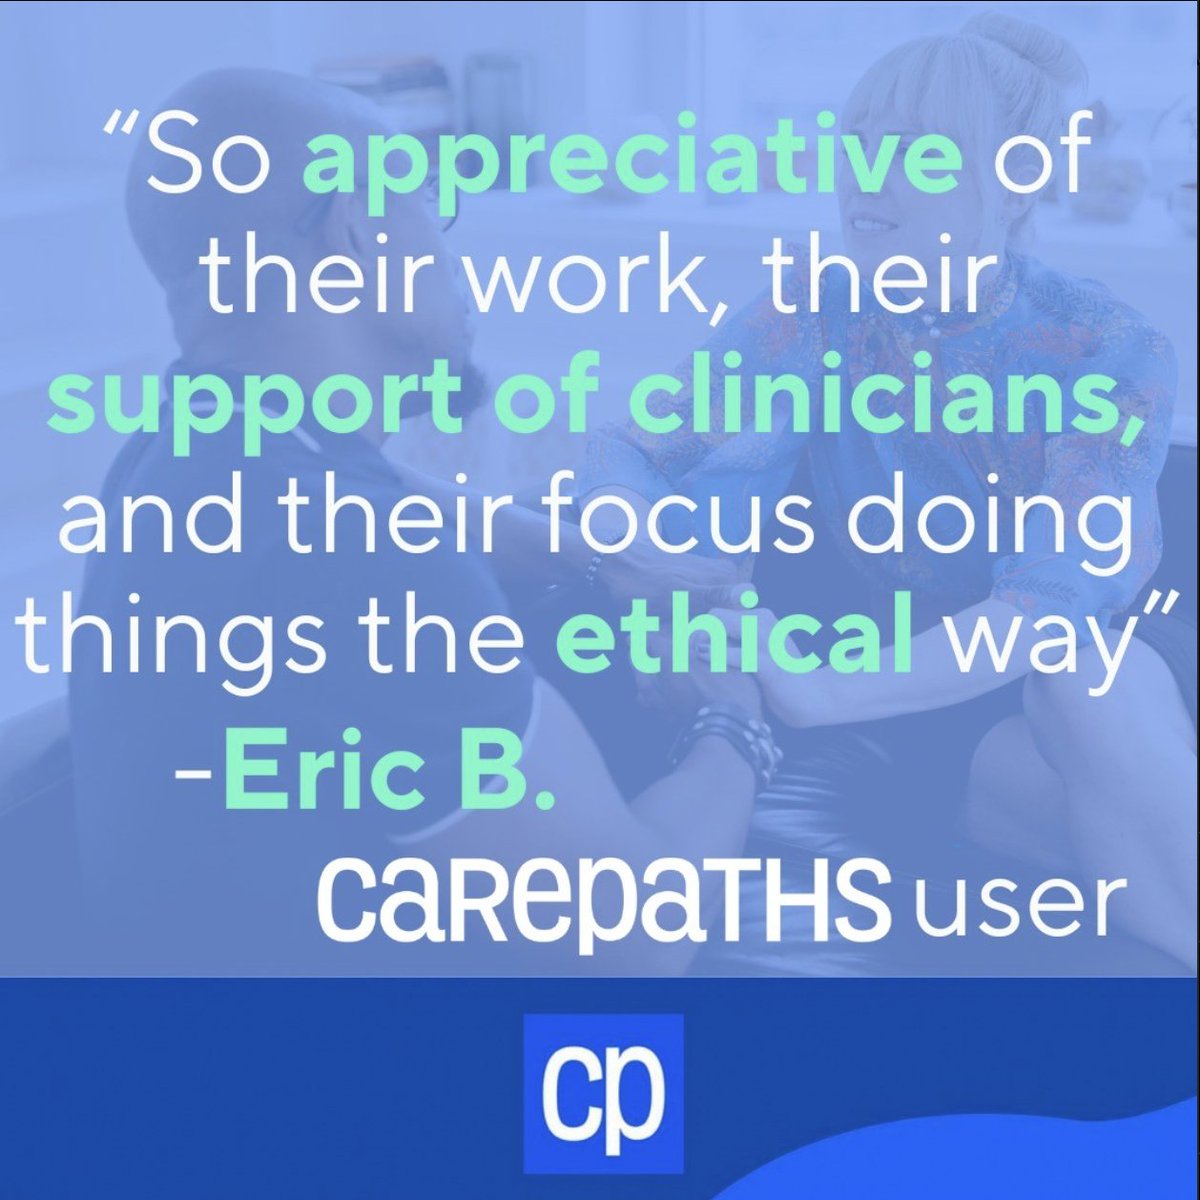 #therapist #therapists #counseling #counselor #psychology #psychologist #clinicalpsychology #clinicalpsychologist #socialworker #mentalhealth #psychiatrist #telehealth #privatepractice #teletherapy #digitalfrontdoor #HIPAA #psychotherapy #ONC #mentalhealthapp #ehr #ehrsoftware